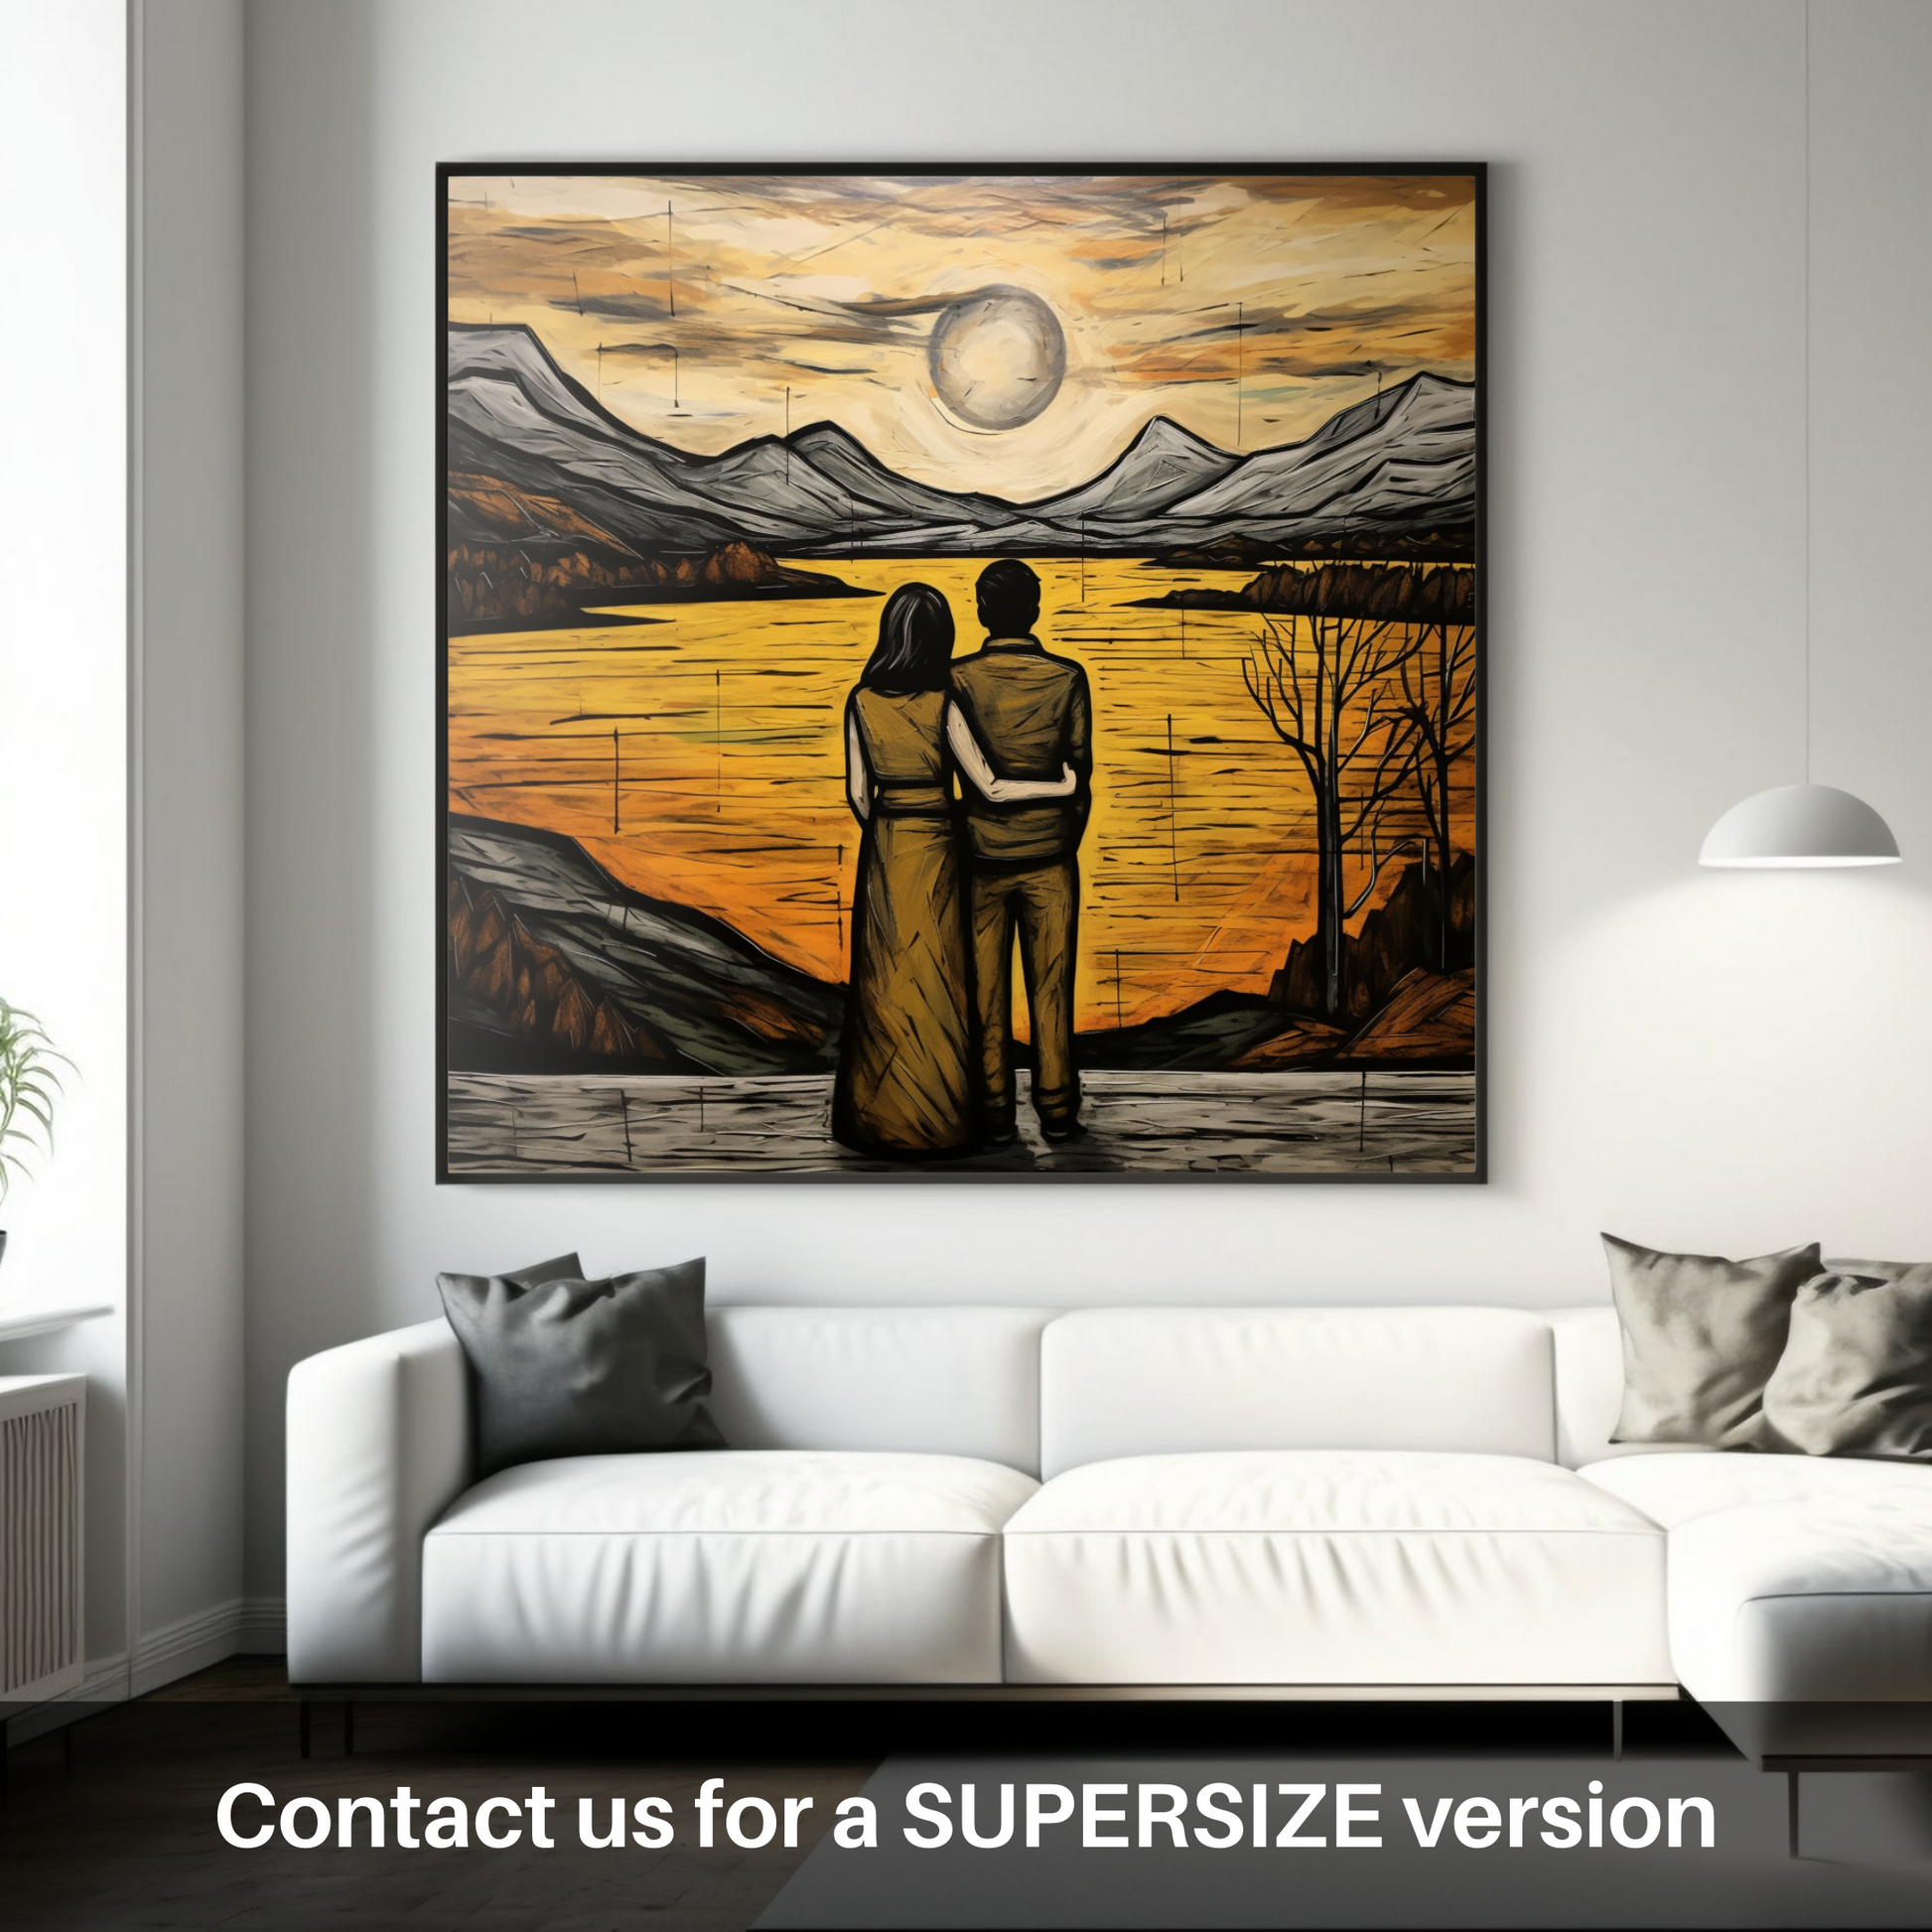 Huge supersize print of A couple holding hands looking out on Loch Lomond